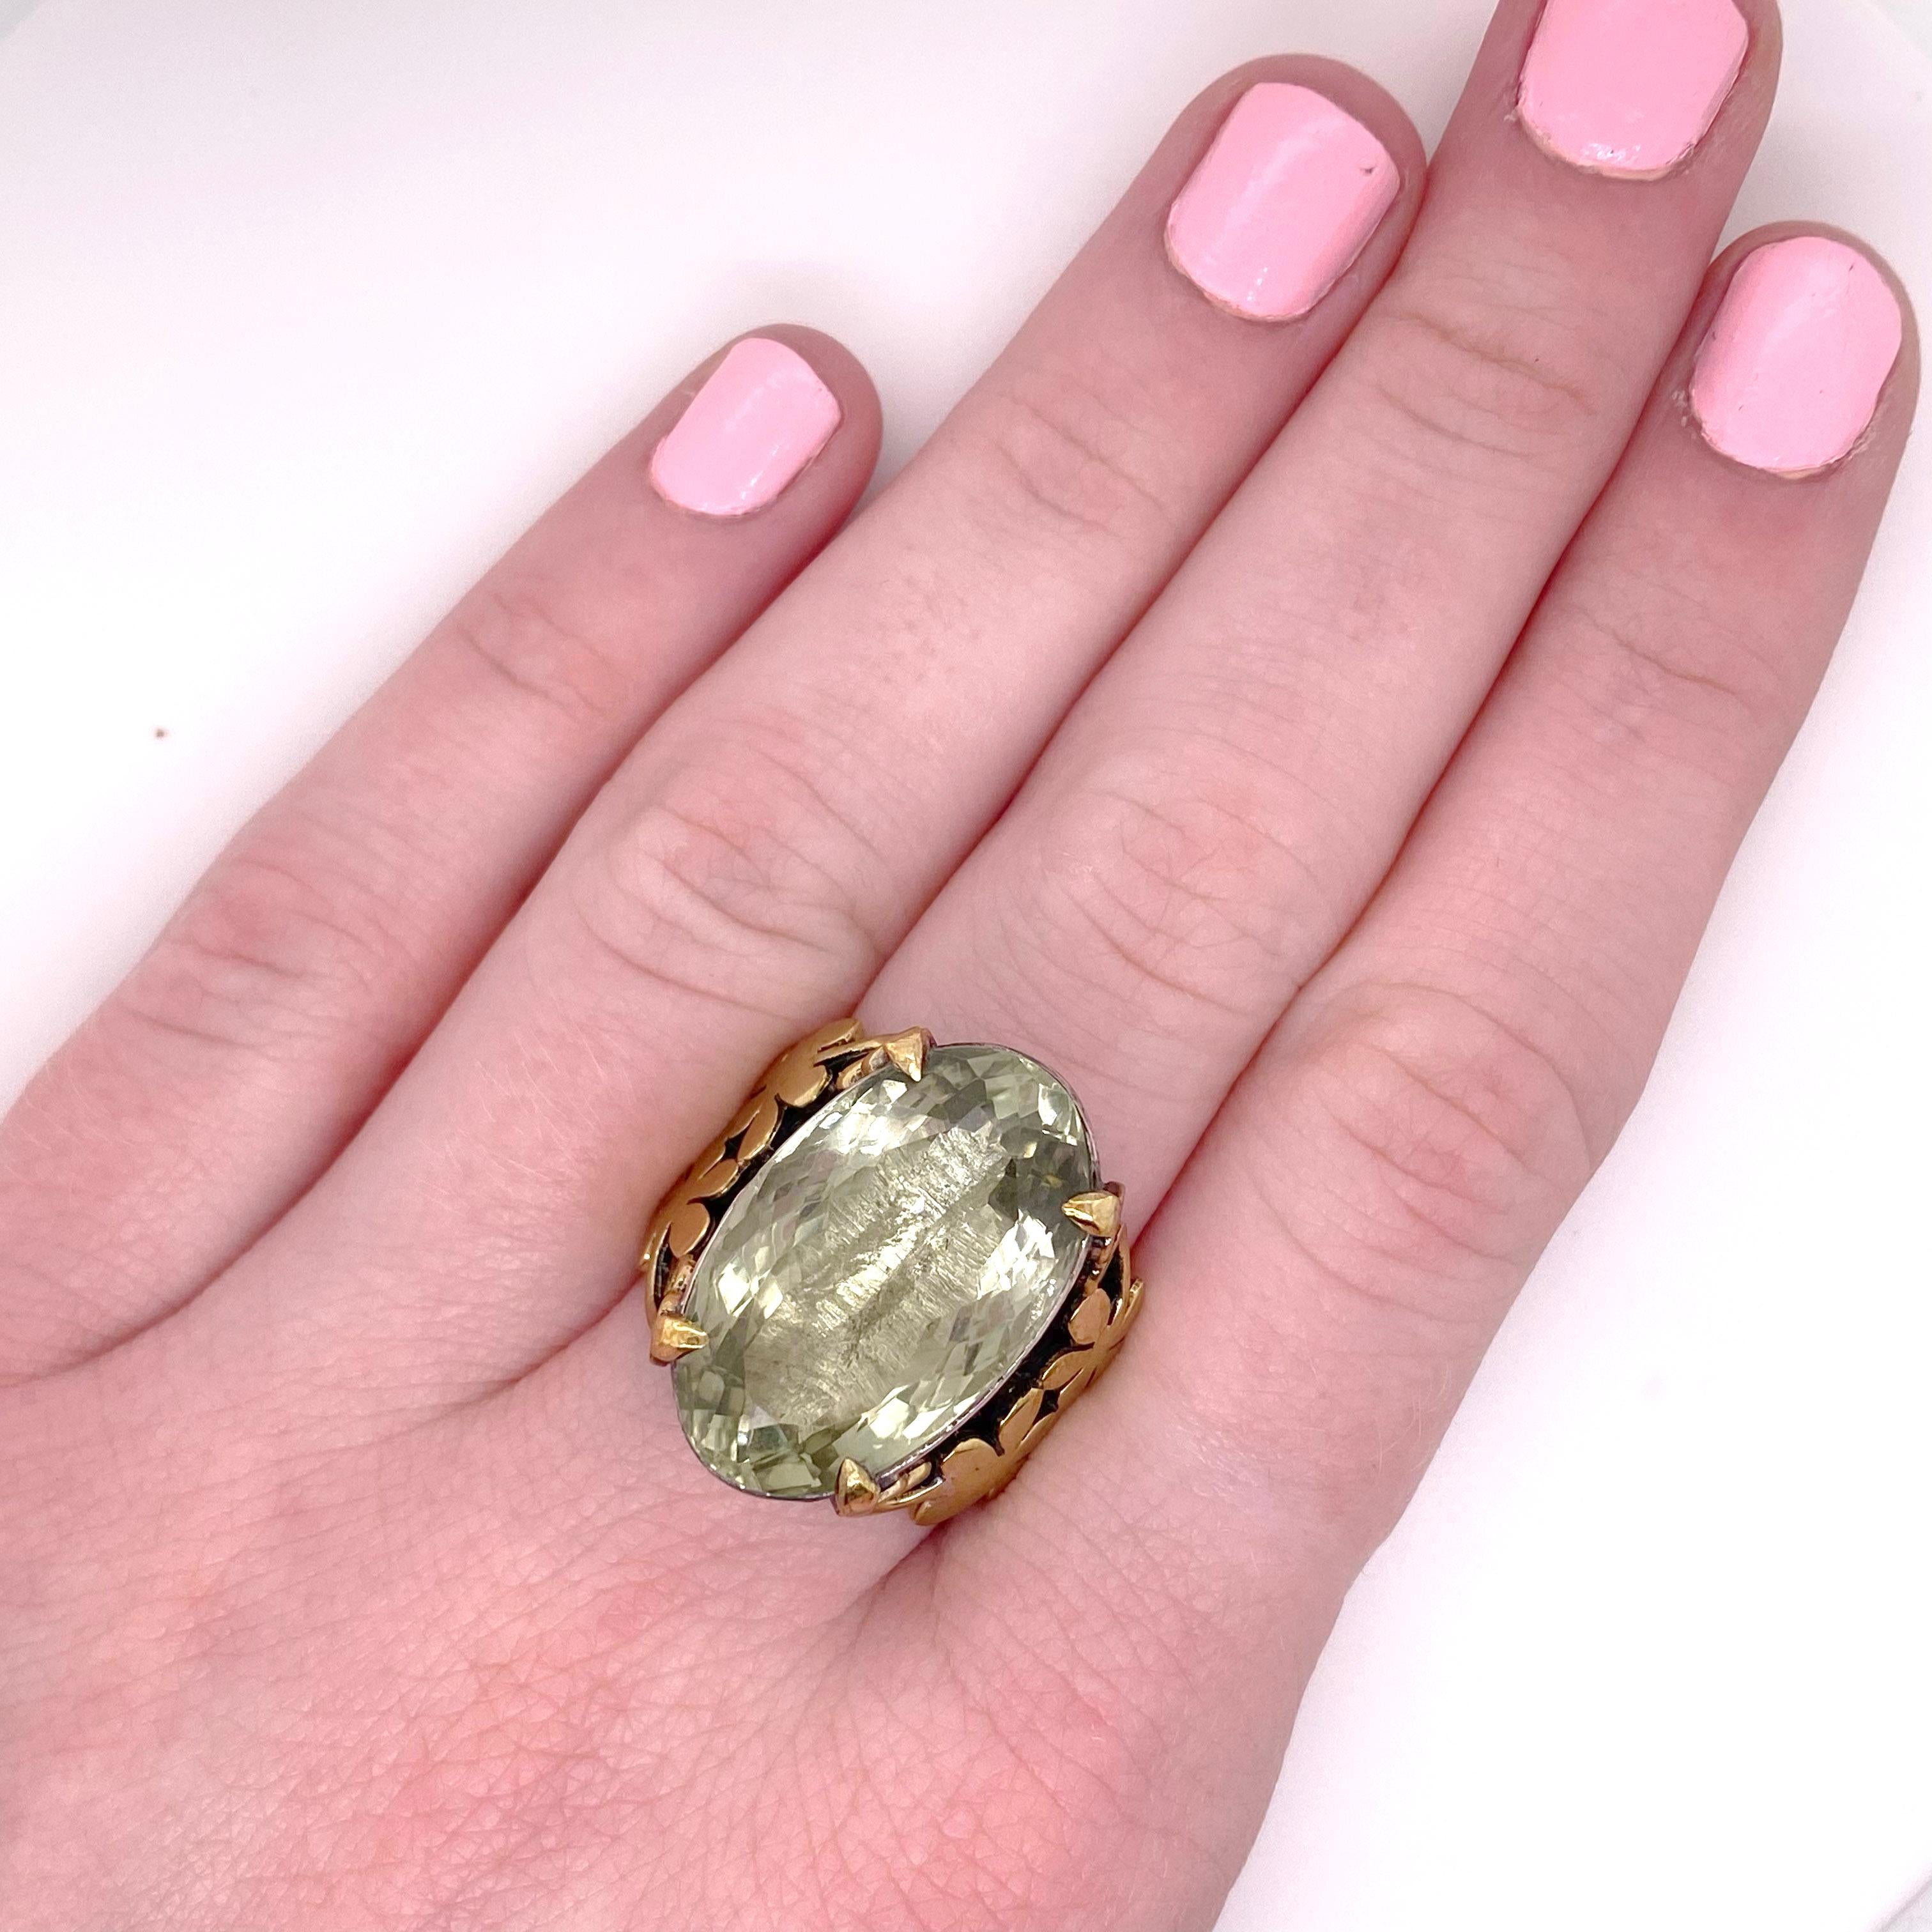 Huge 14 carat green amethyst in detailed 14 karat yellow gold and sterling 925. This ring is gorgeous on and even more beautiful in person!
Metal Quality: Sterling Silver And 14 Karat Gold
Gemstone: Green Amethyst
Gemstone Color: Green
Gemstone